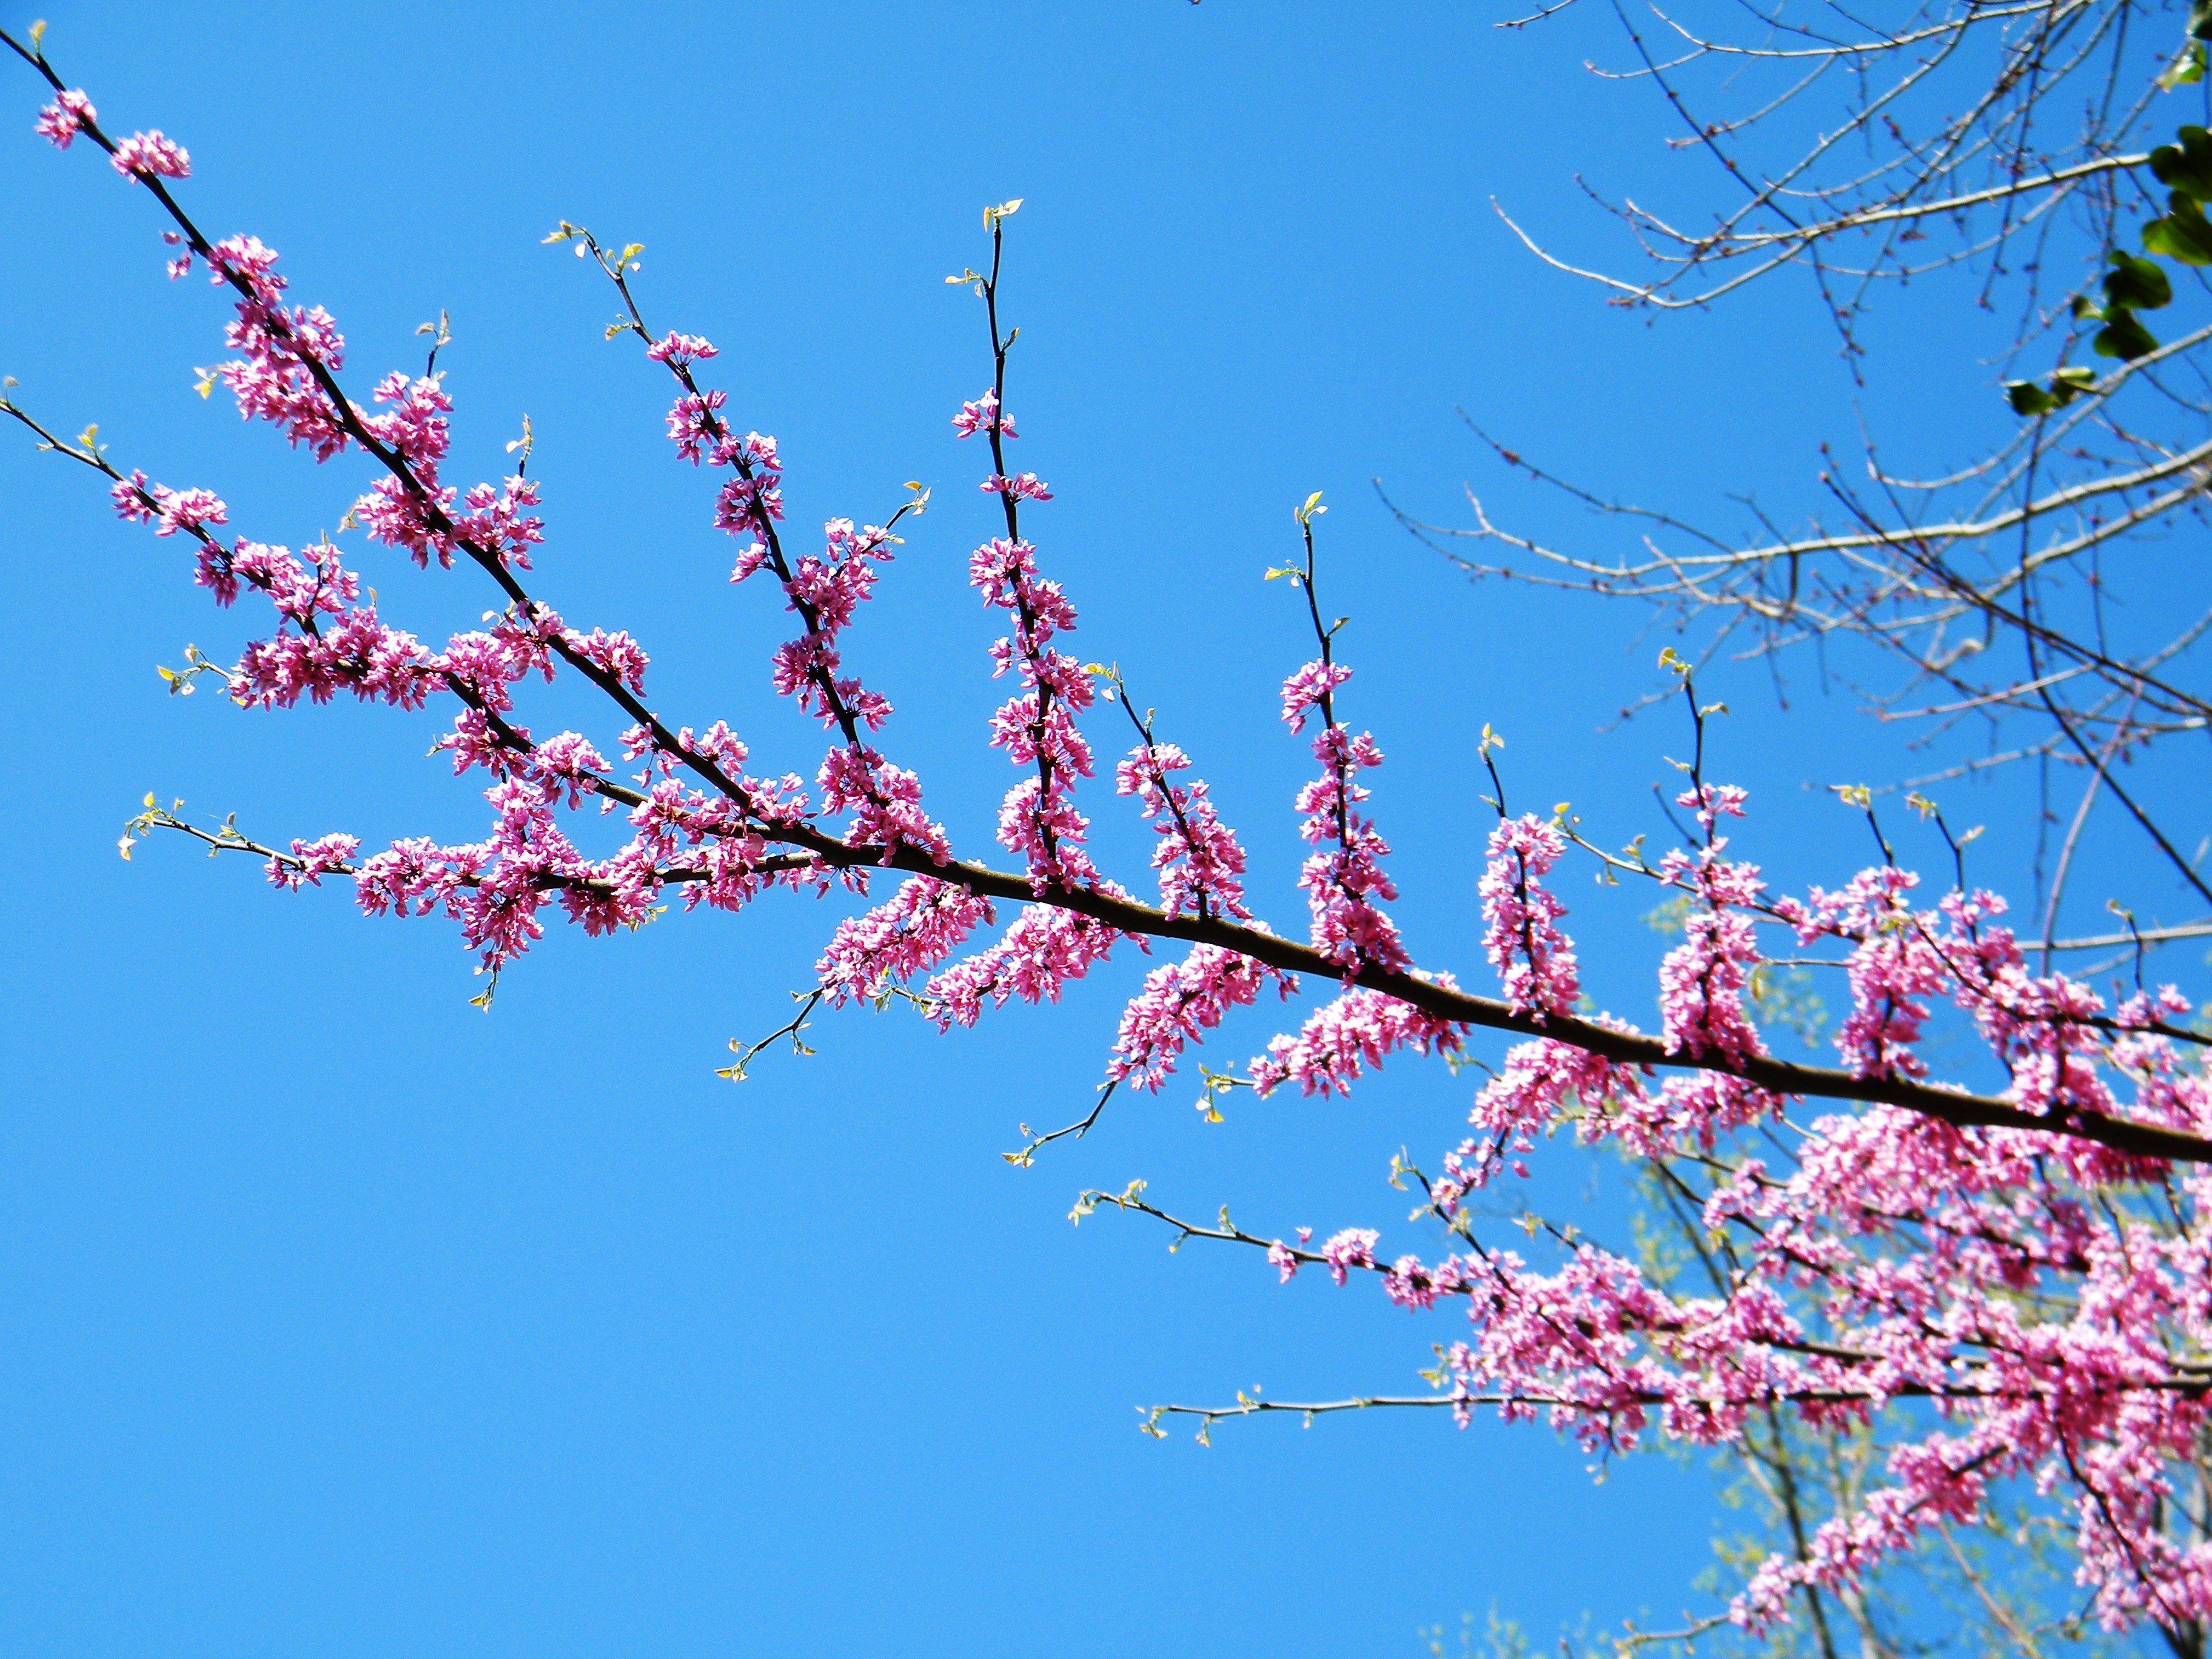 Multiple branches on a tree with clusters of pink and red blossoms and new leaves in spring